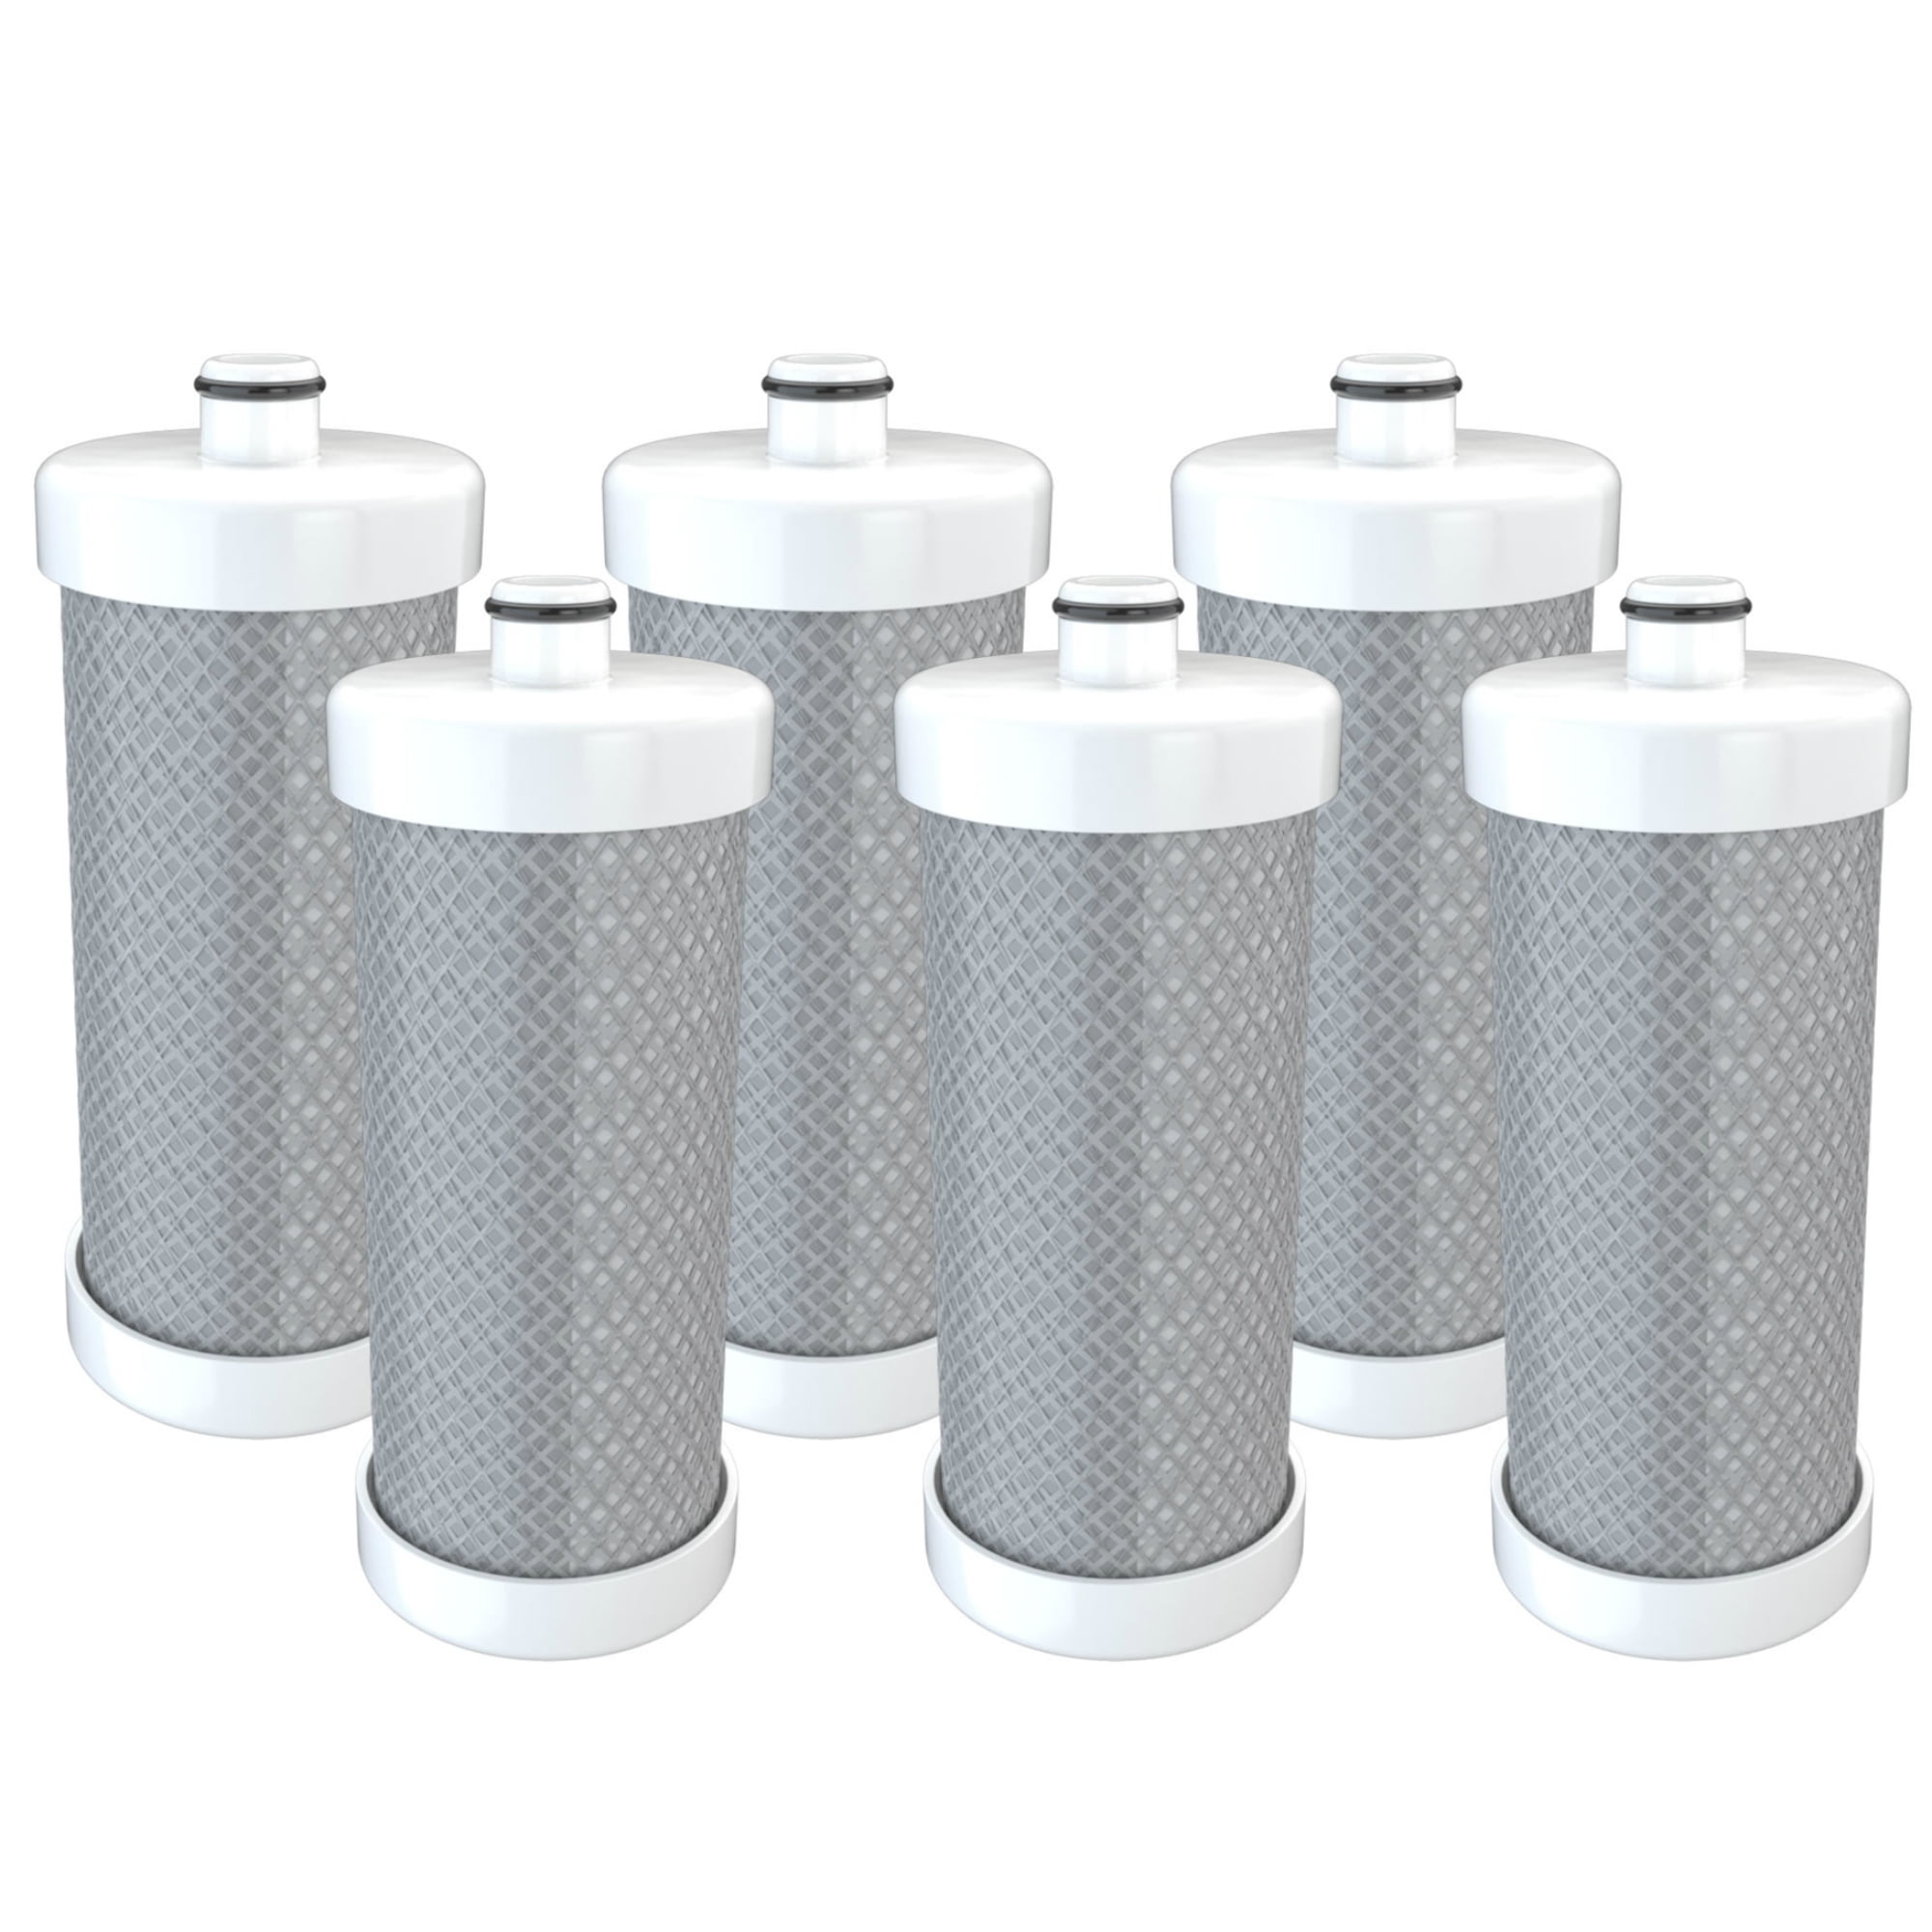 6 Pack Replacement Water Filter for Frigidaire FRS6R5ESB4 Refrigerators